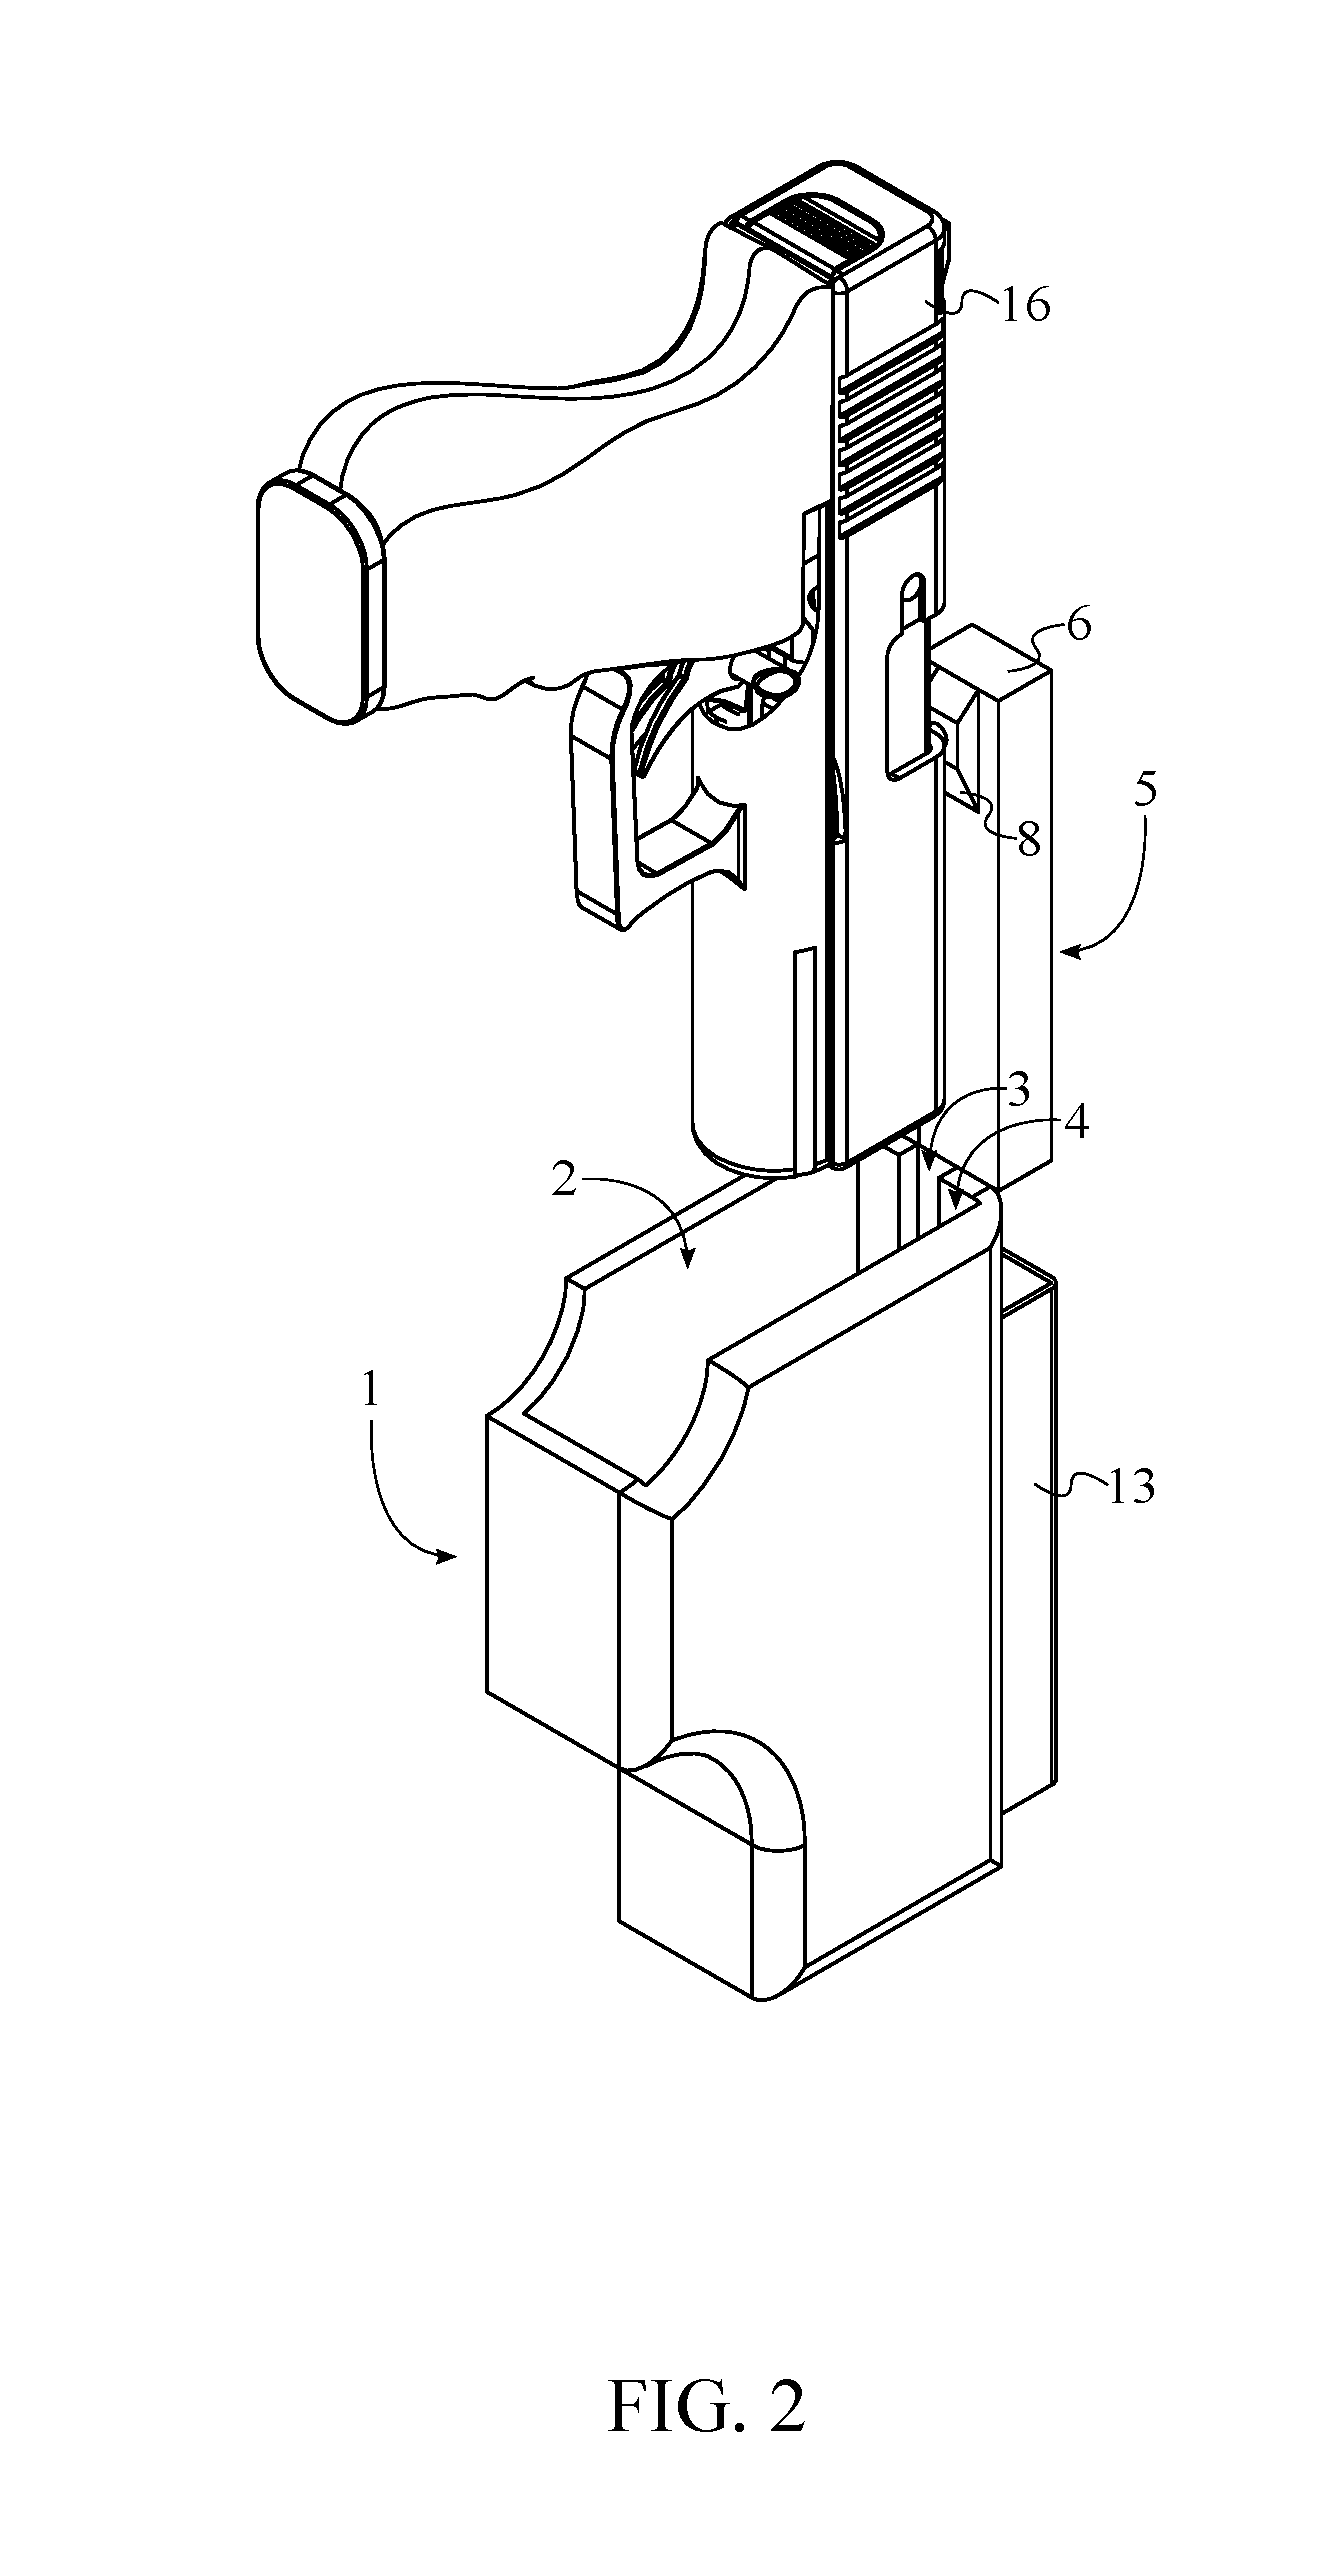 Firearm Monitoring and Tracking System